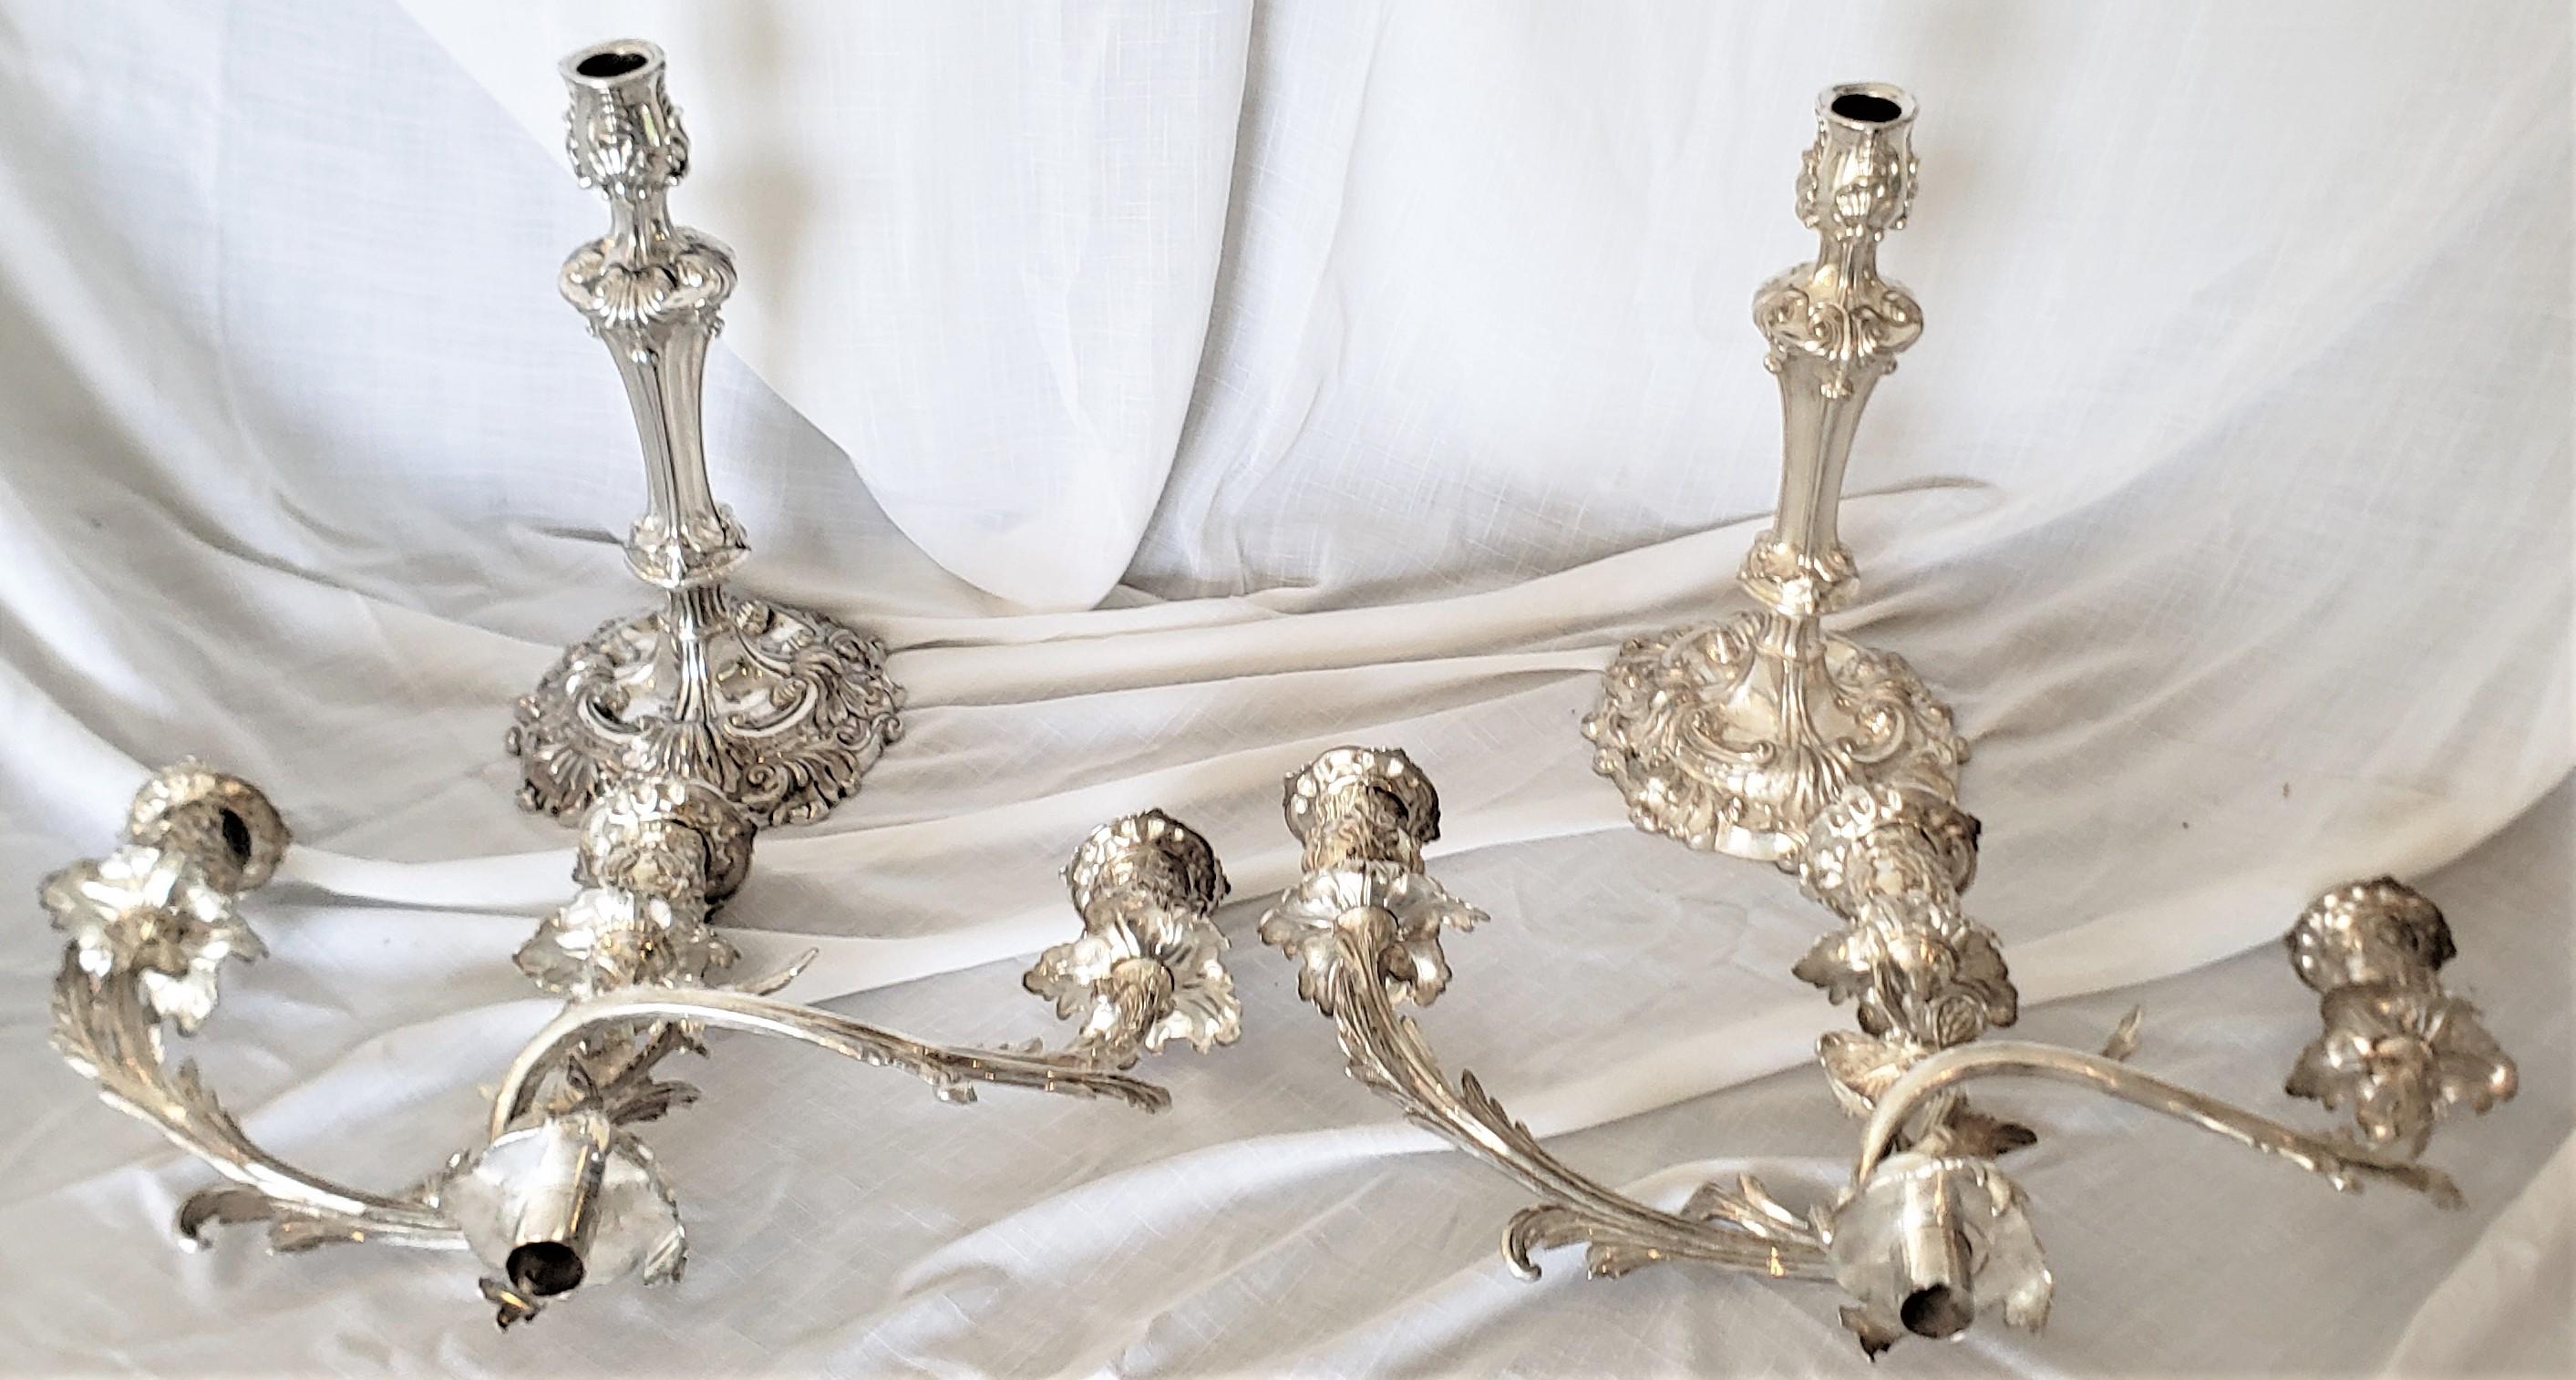 19th Century Pair of Antique Sheffield Plate Convertible 3 Branch Candlesticks or Candelabra For Sale